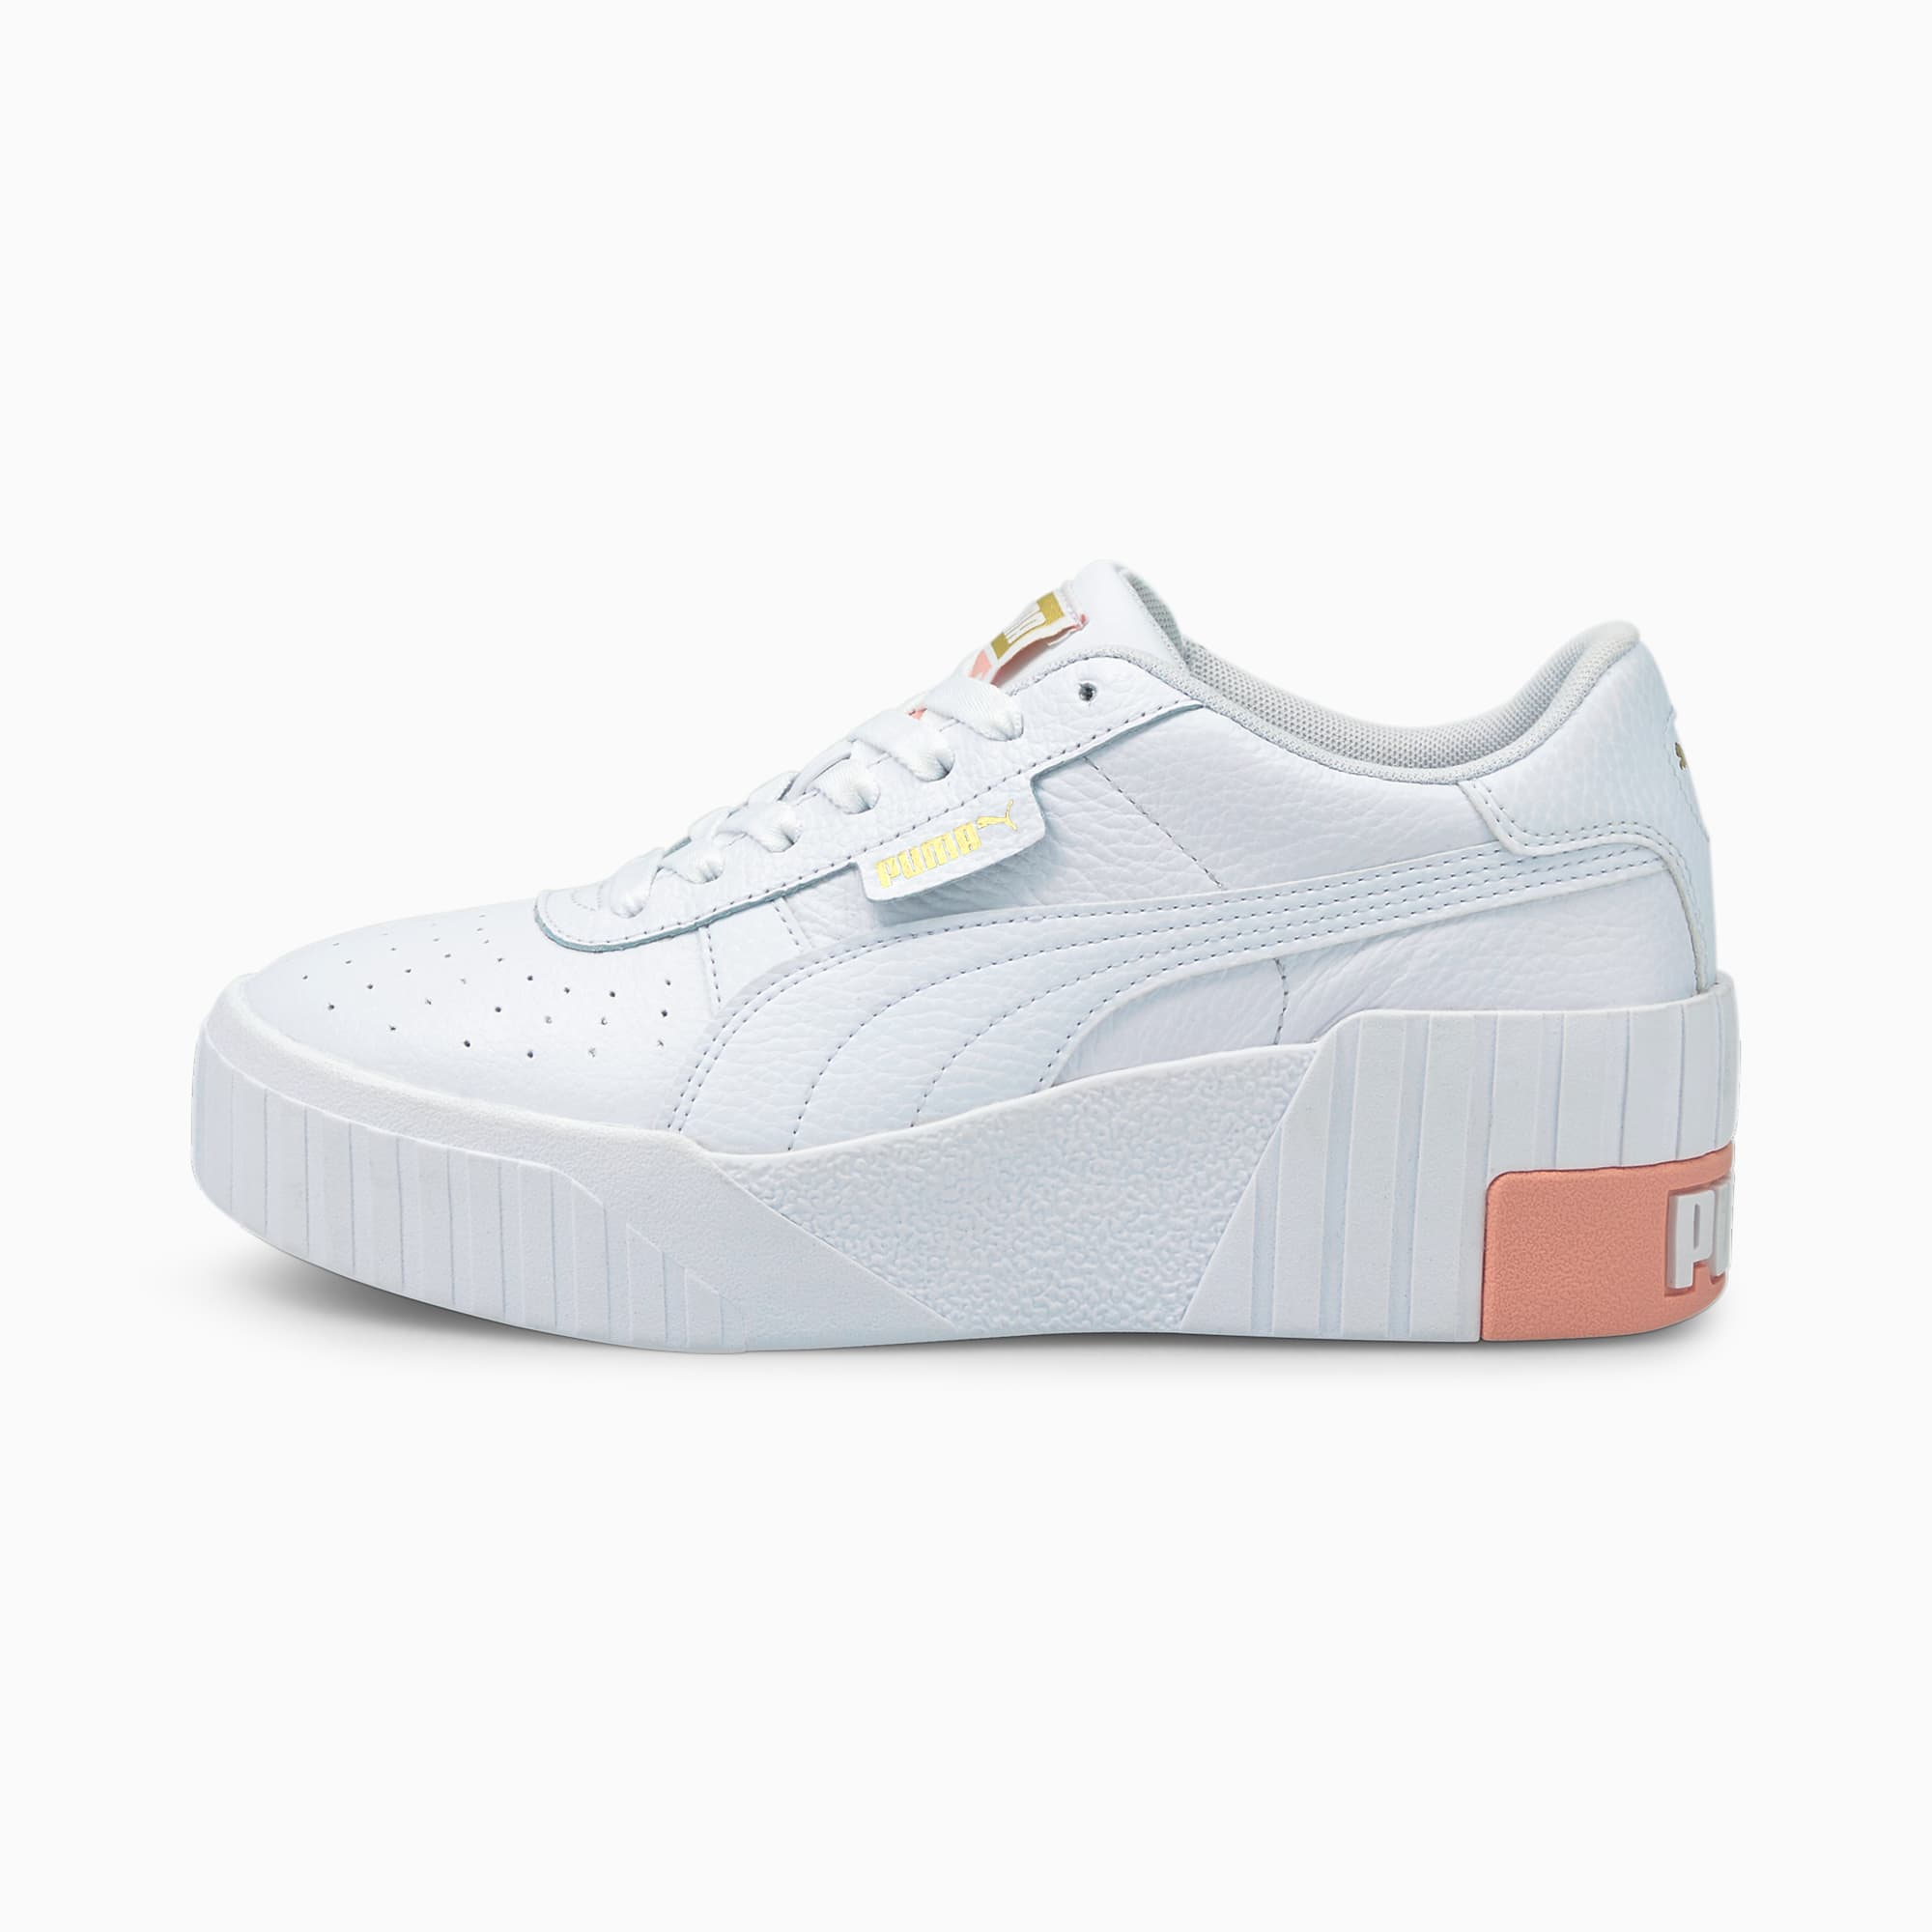 PUMA Chaussure Basket Cali Wedge, Blanc, Taille 38, Chaussures